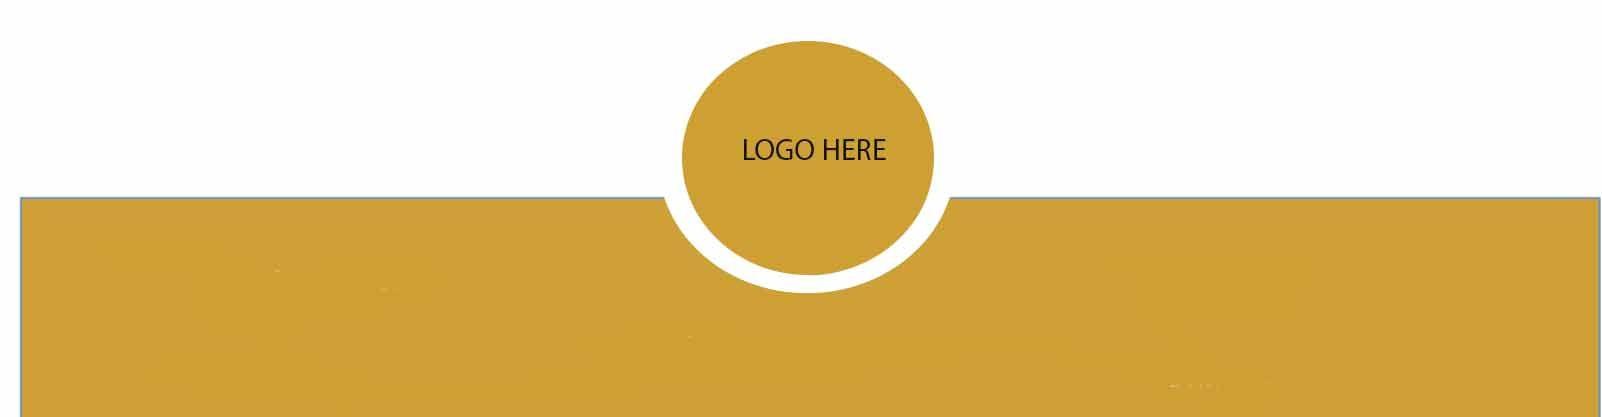 Orange Half Circle Logo - How to create a CSS semi circle with logo inside? - Stack Overflow